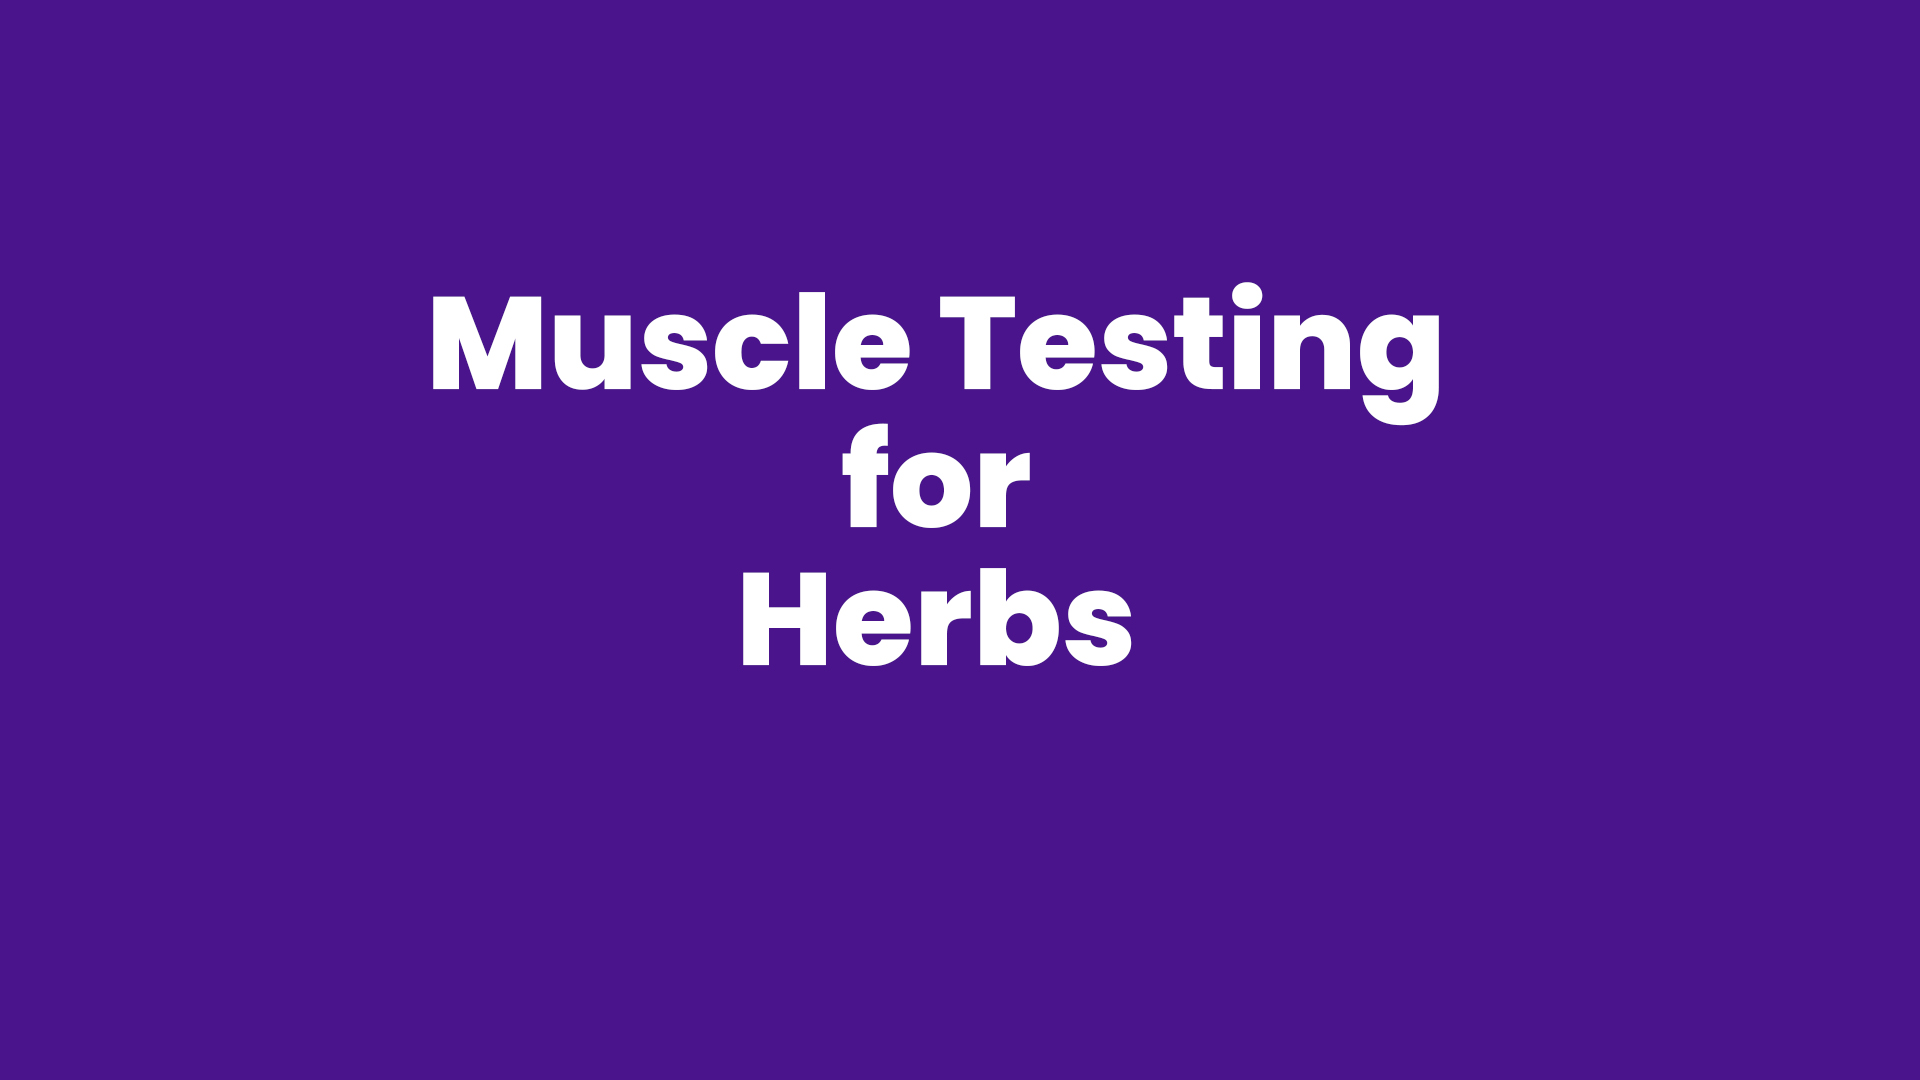 Muscle Testing for Herbs